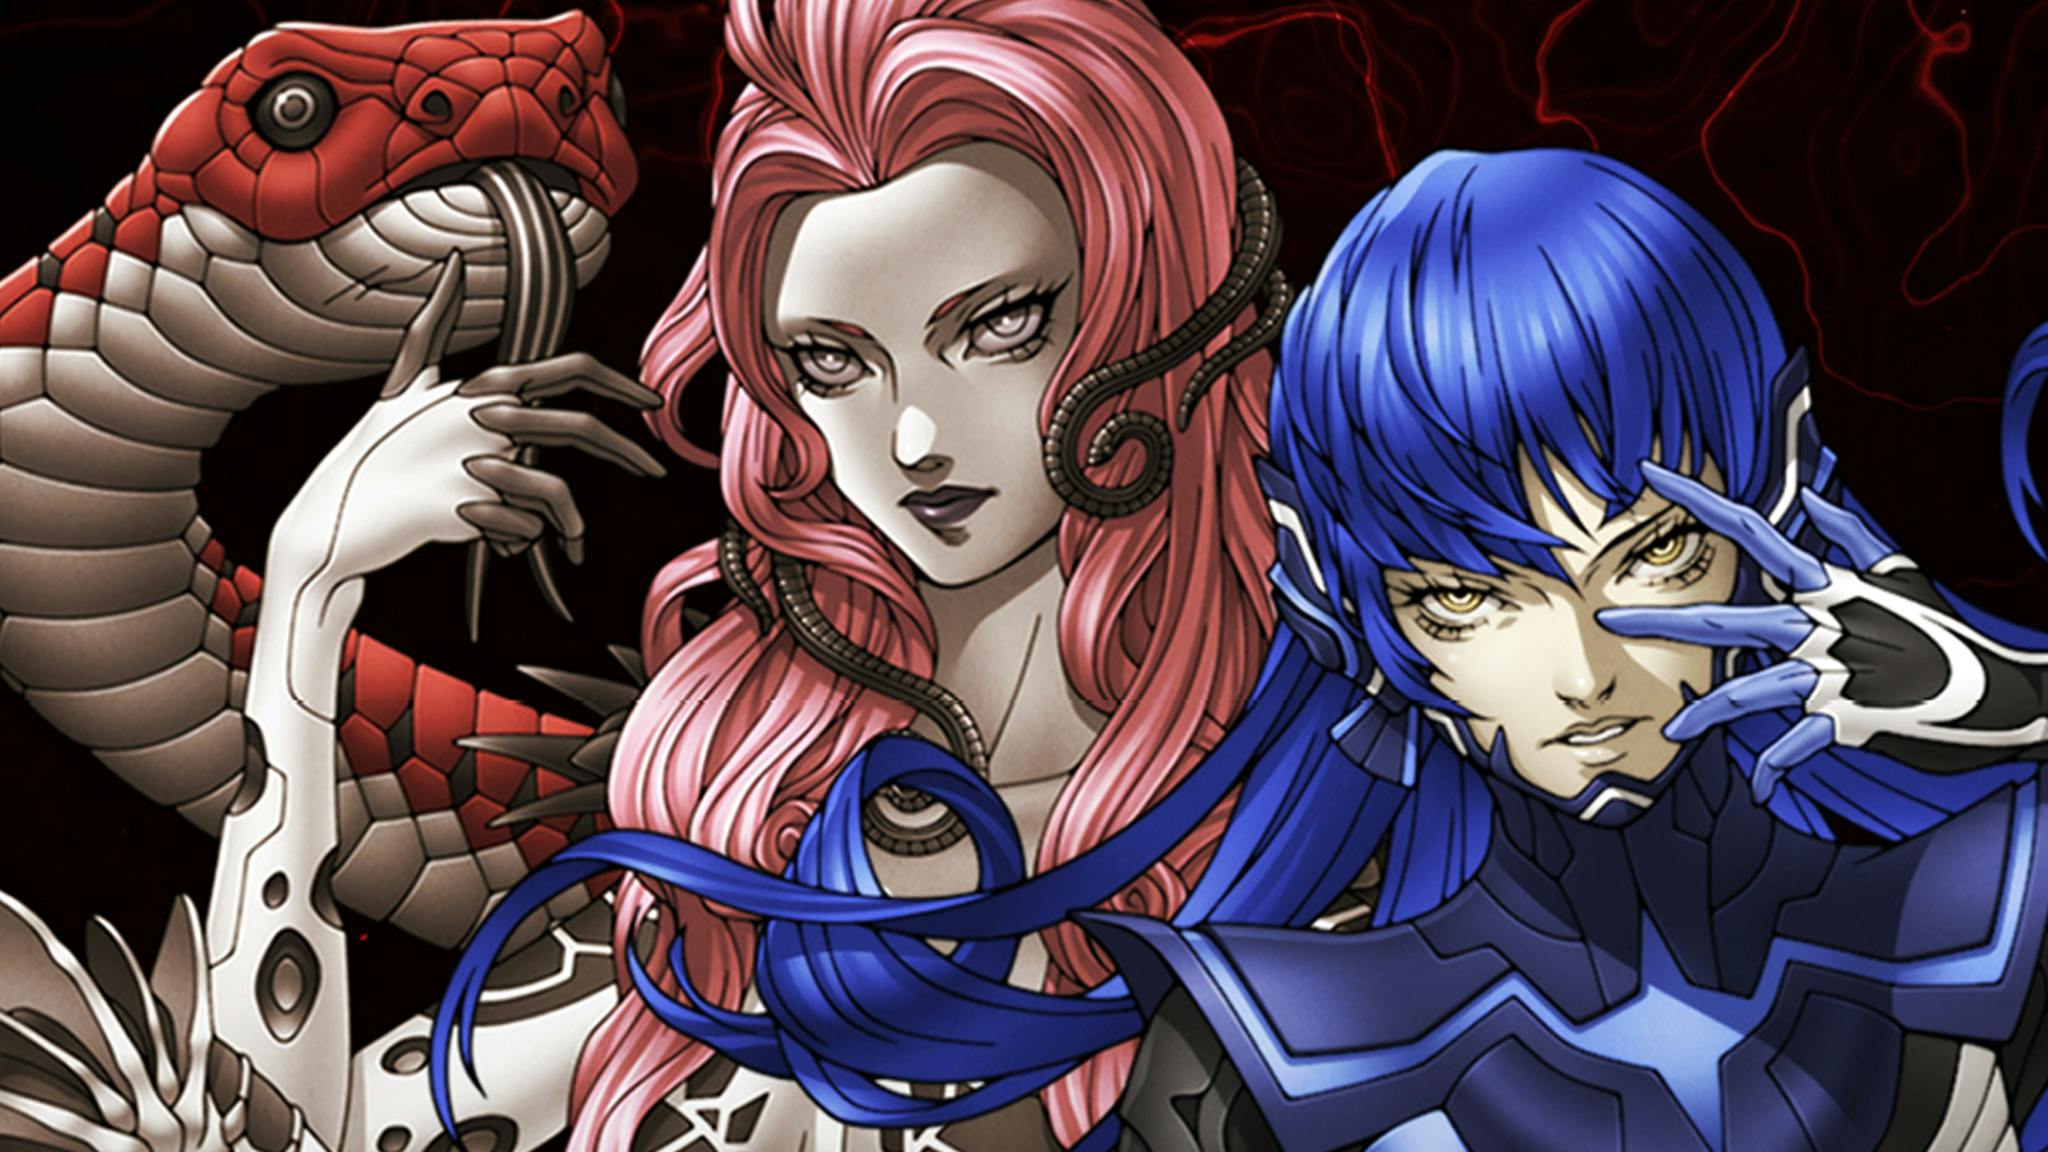 Download goers can be among the first to play Shin Megami Tensei V: Vengeance